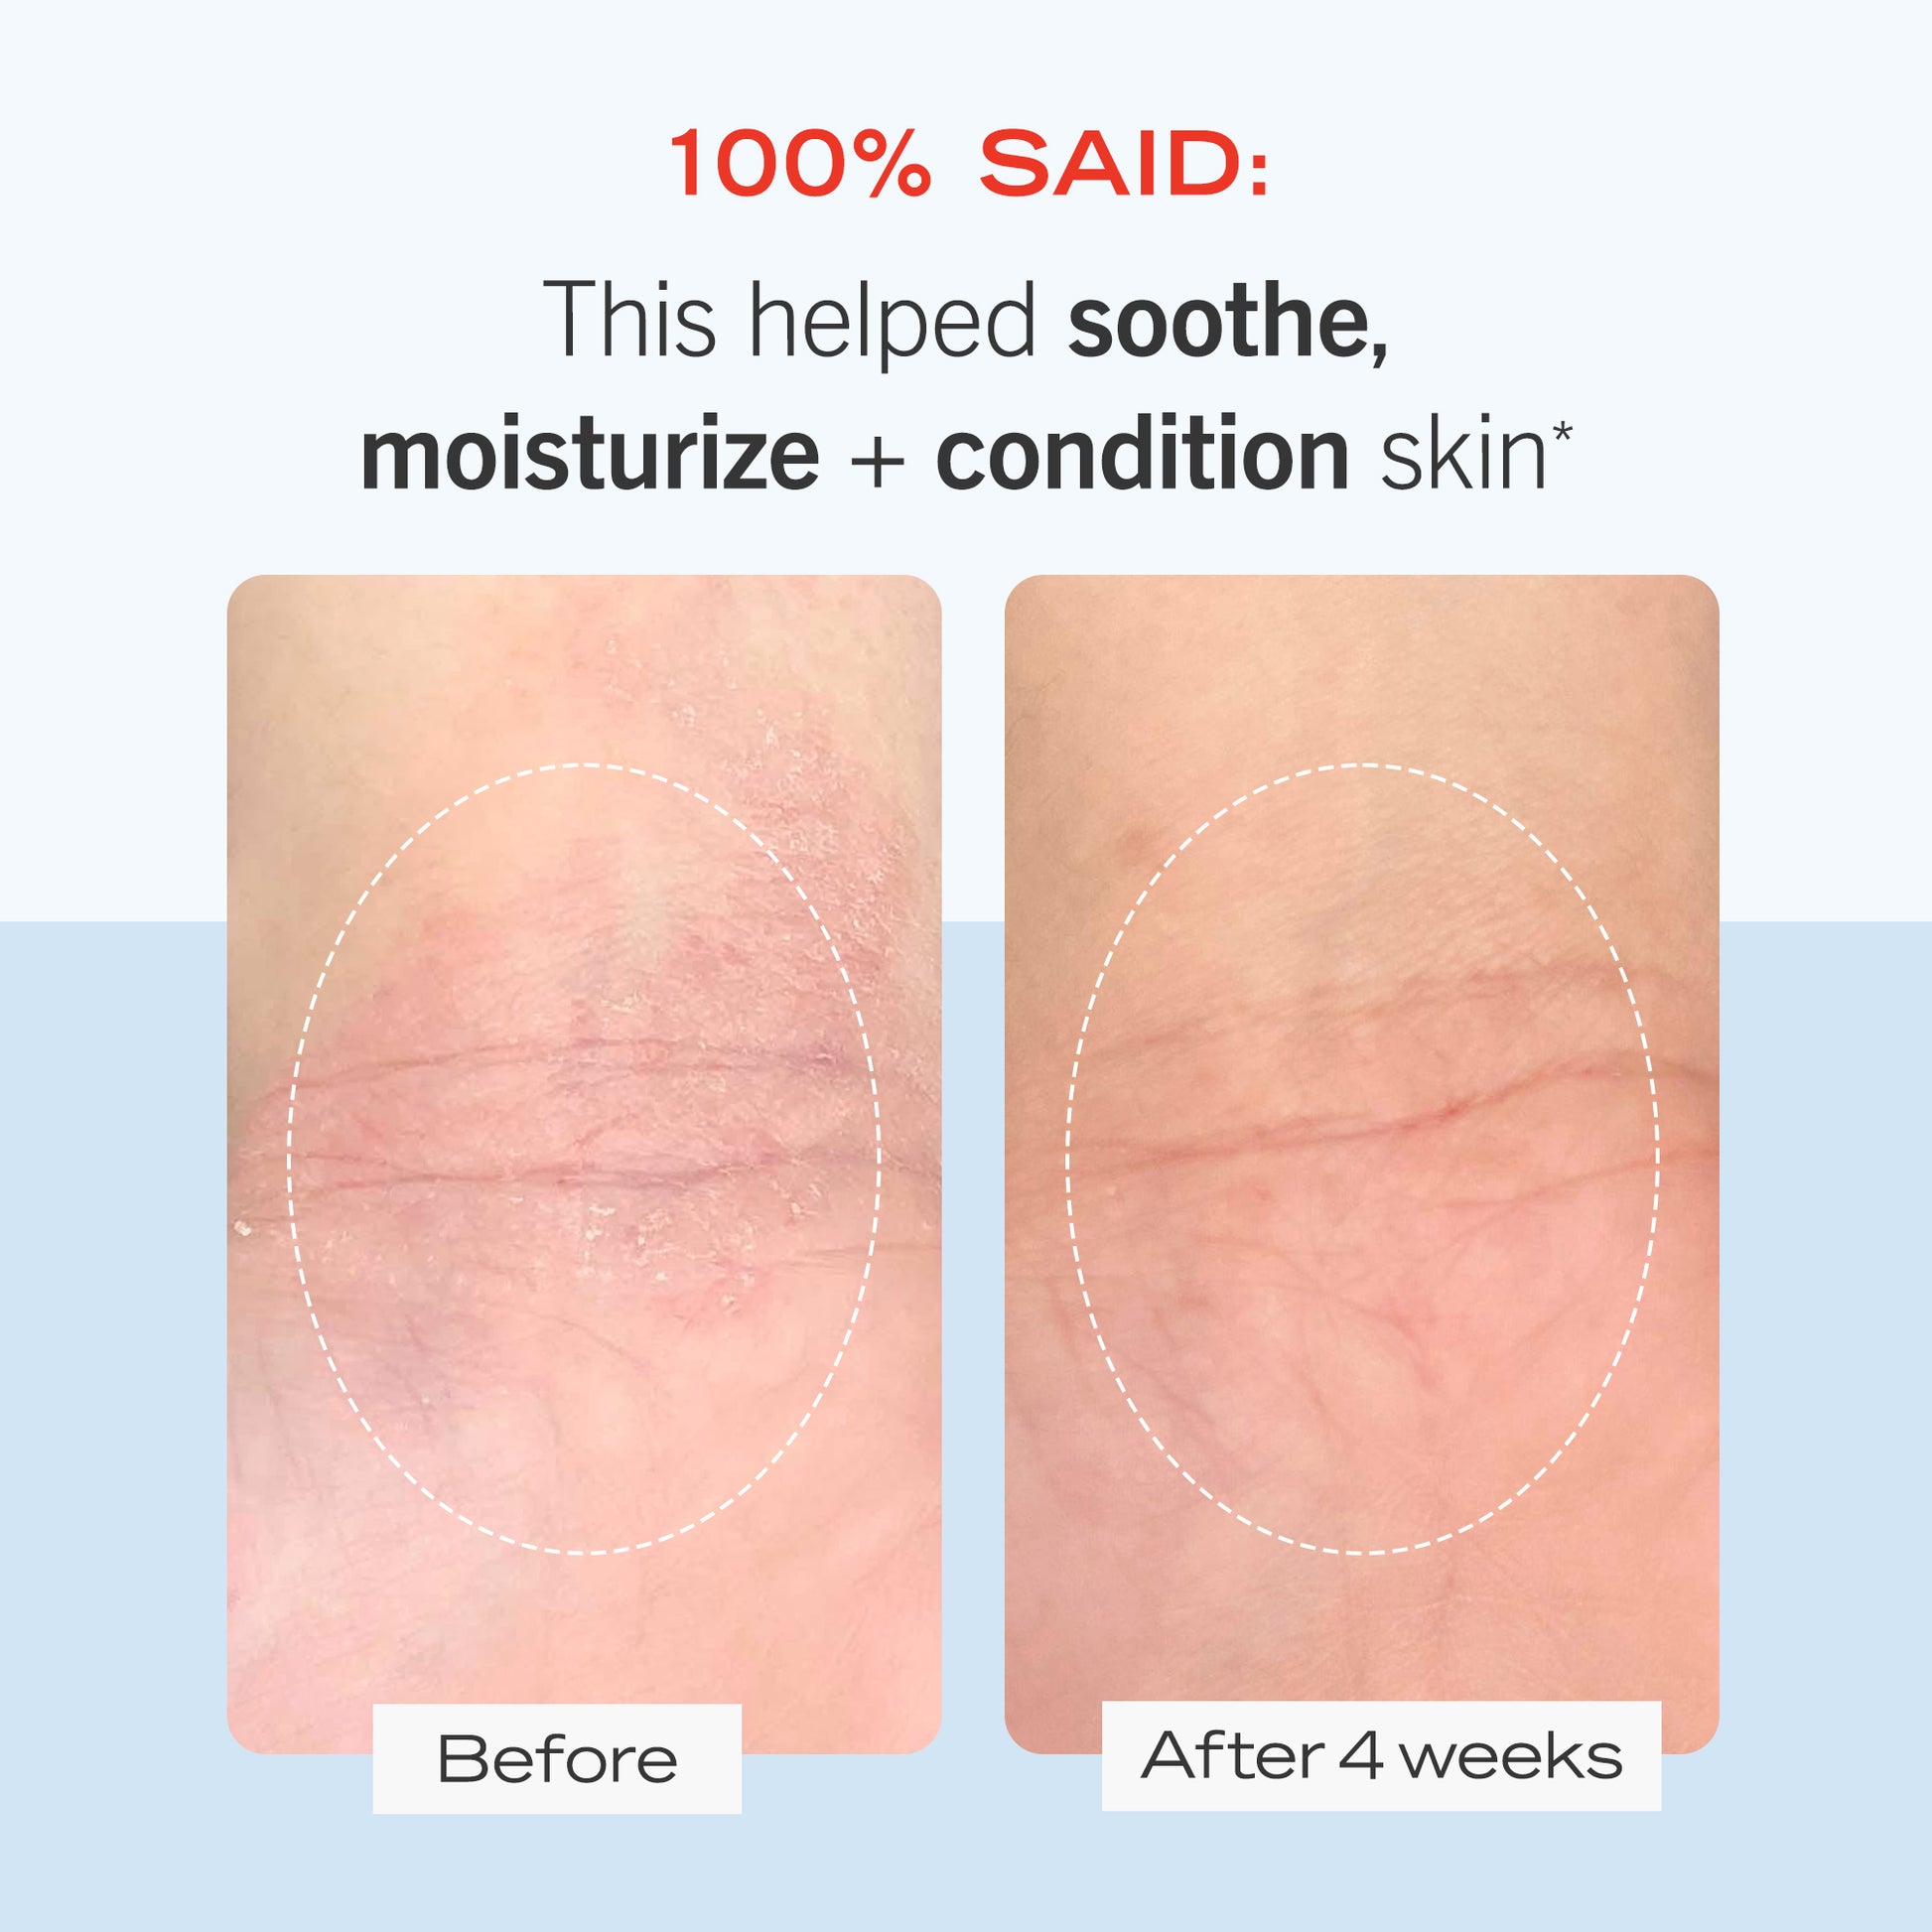 Skin Before and After 4 weeks of using Ultra Repair Cream.  100% said: This helped soothe, moisture + condition skin.